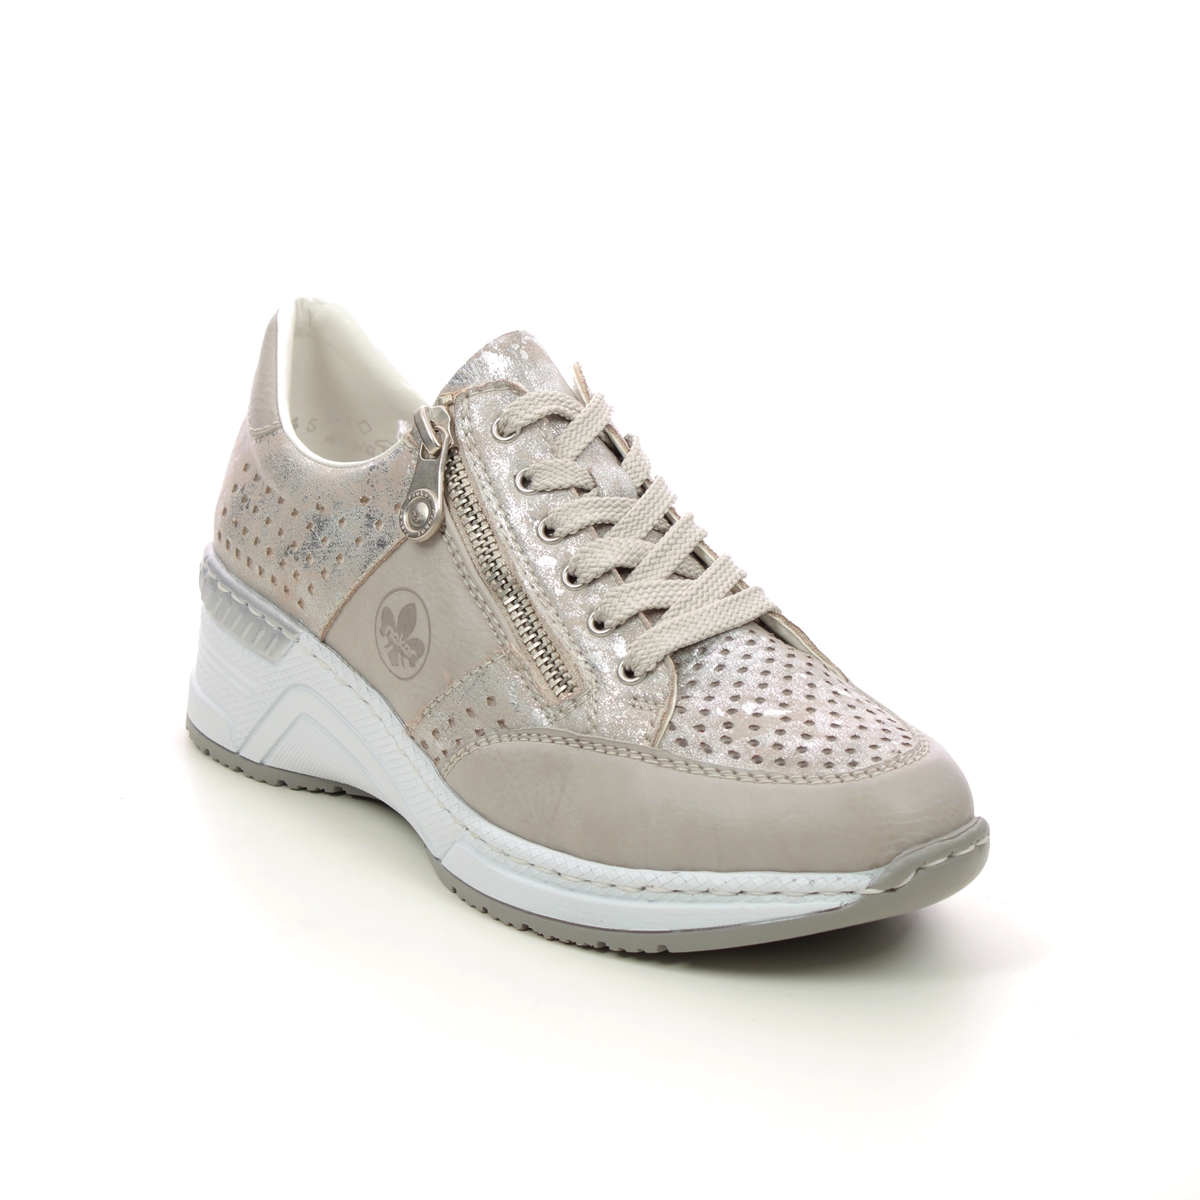 Rieker N4327-80 Light Gold Womens trainers in a Plain Man-made in Size 38